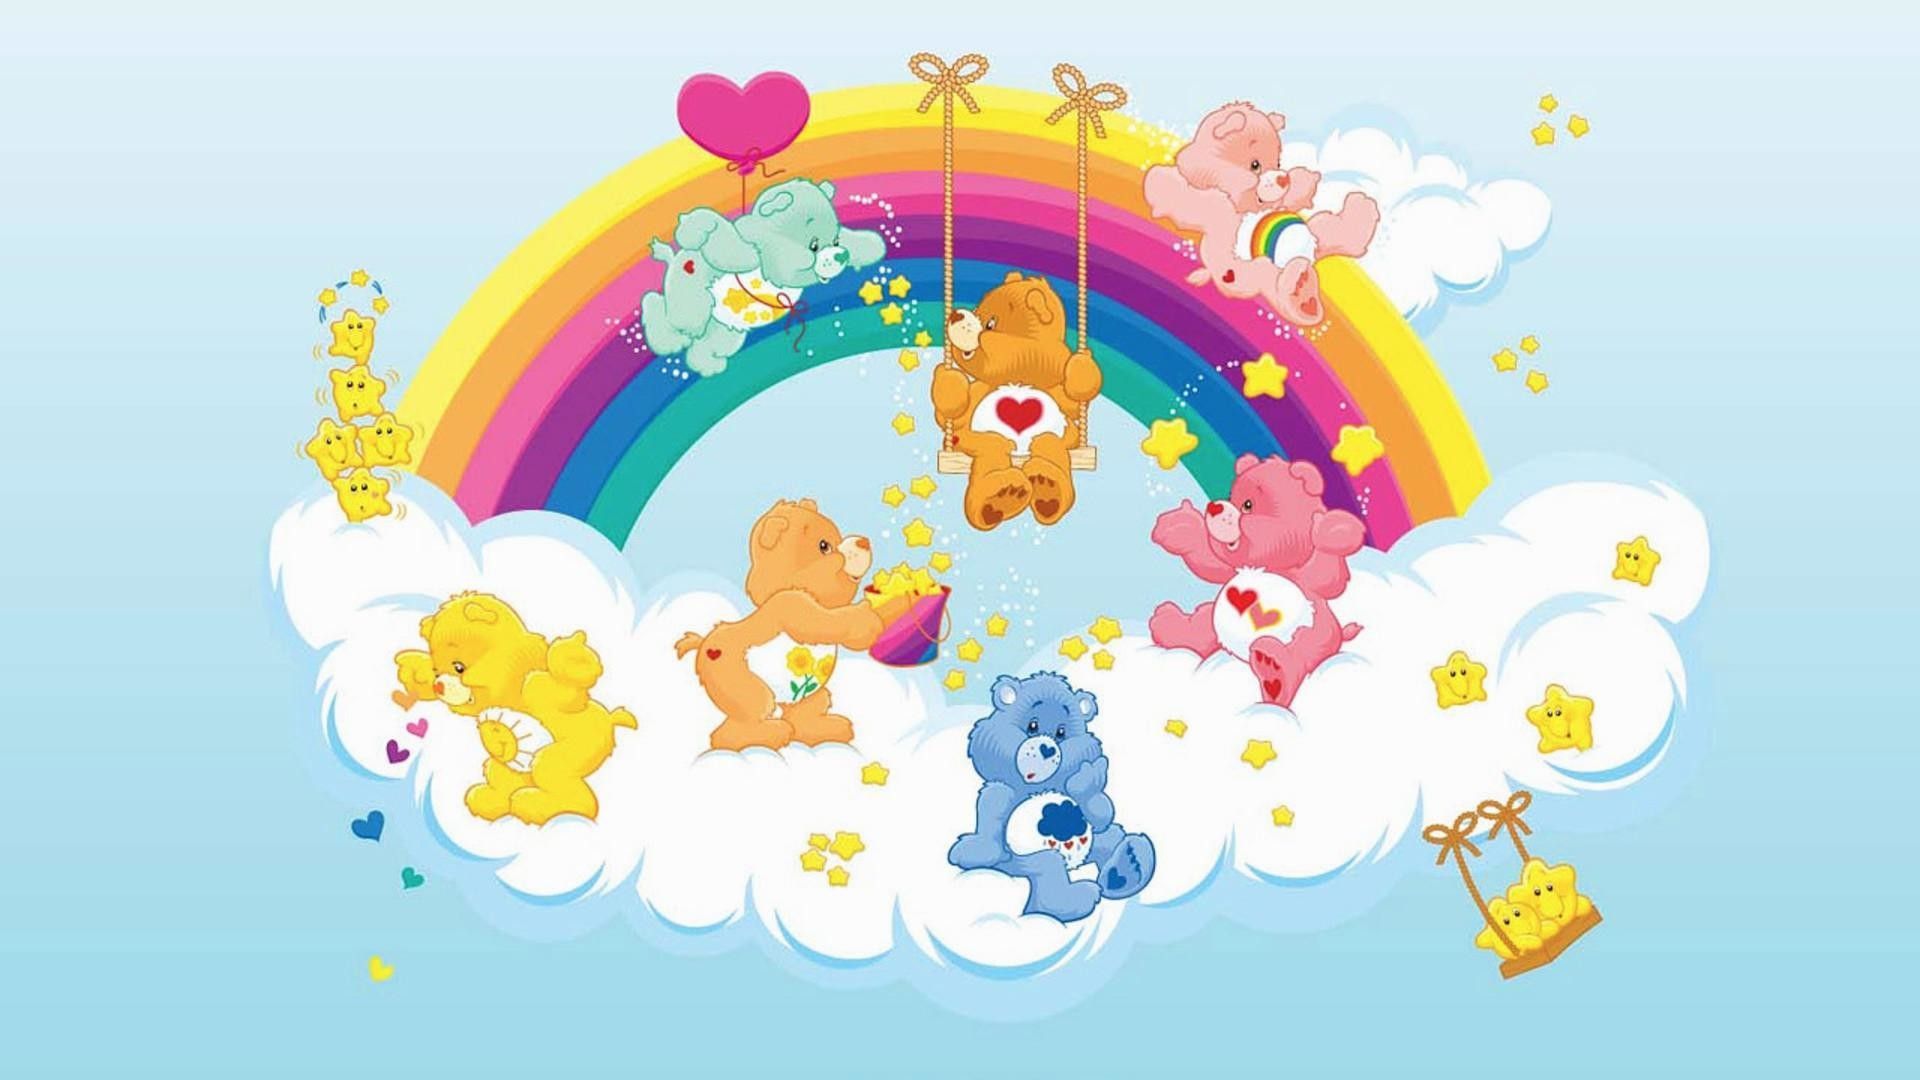 Care Bears wallpaper with resolution 1920x1080 pixel. You can use this wallpaper as background for your desktop Computer Screensavers, Android or iPhone smartphones - Rainbows, Care Bears